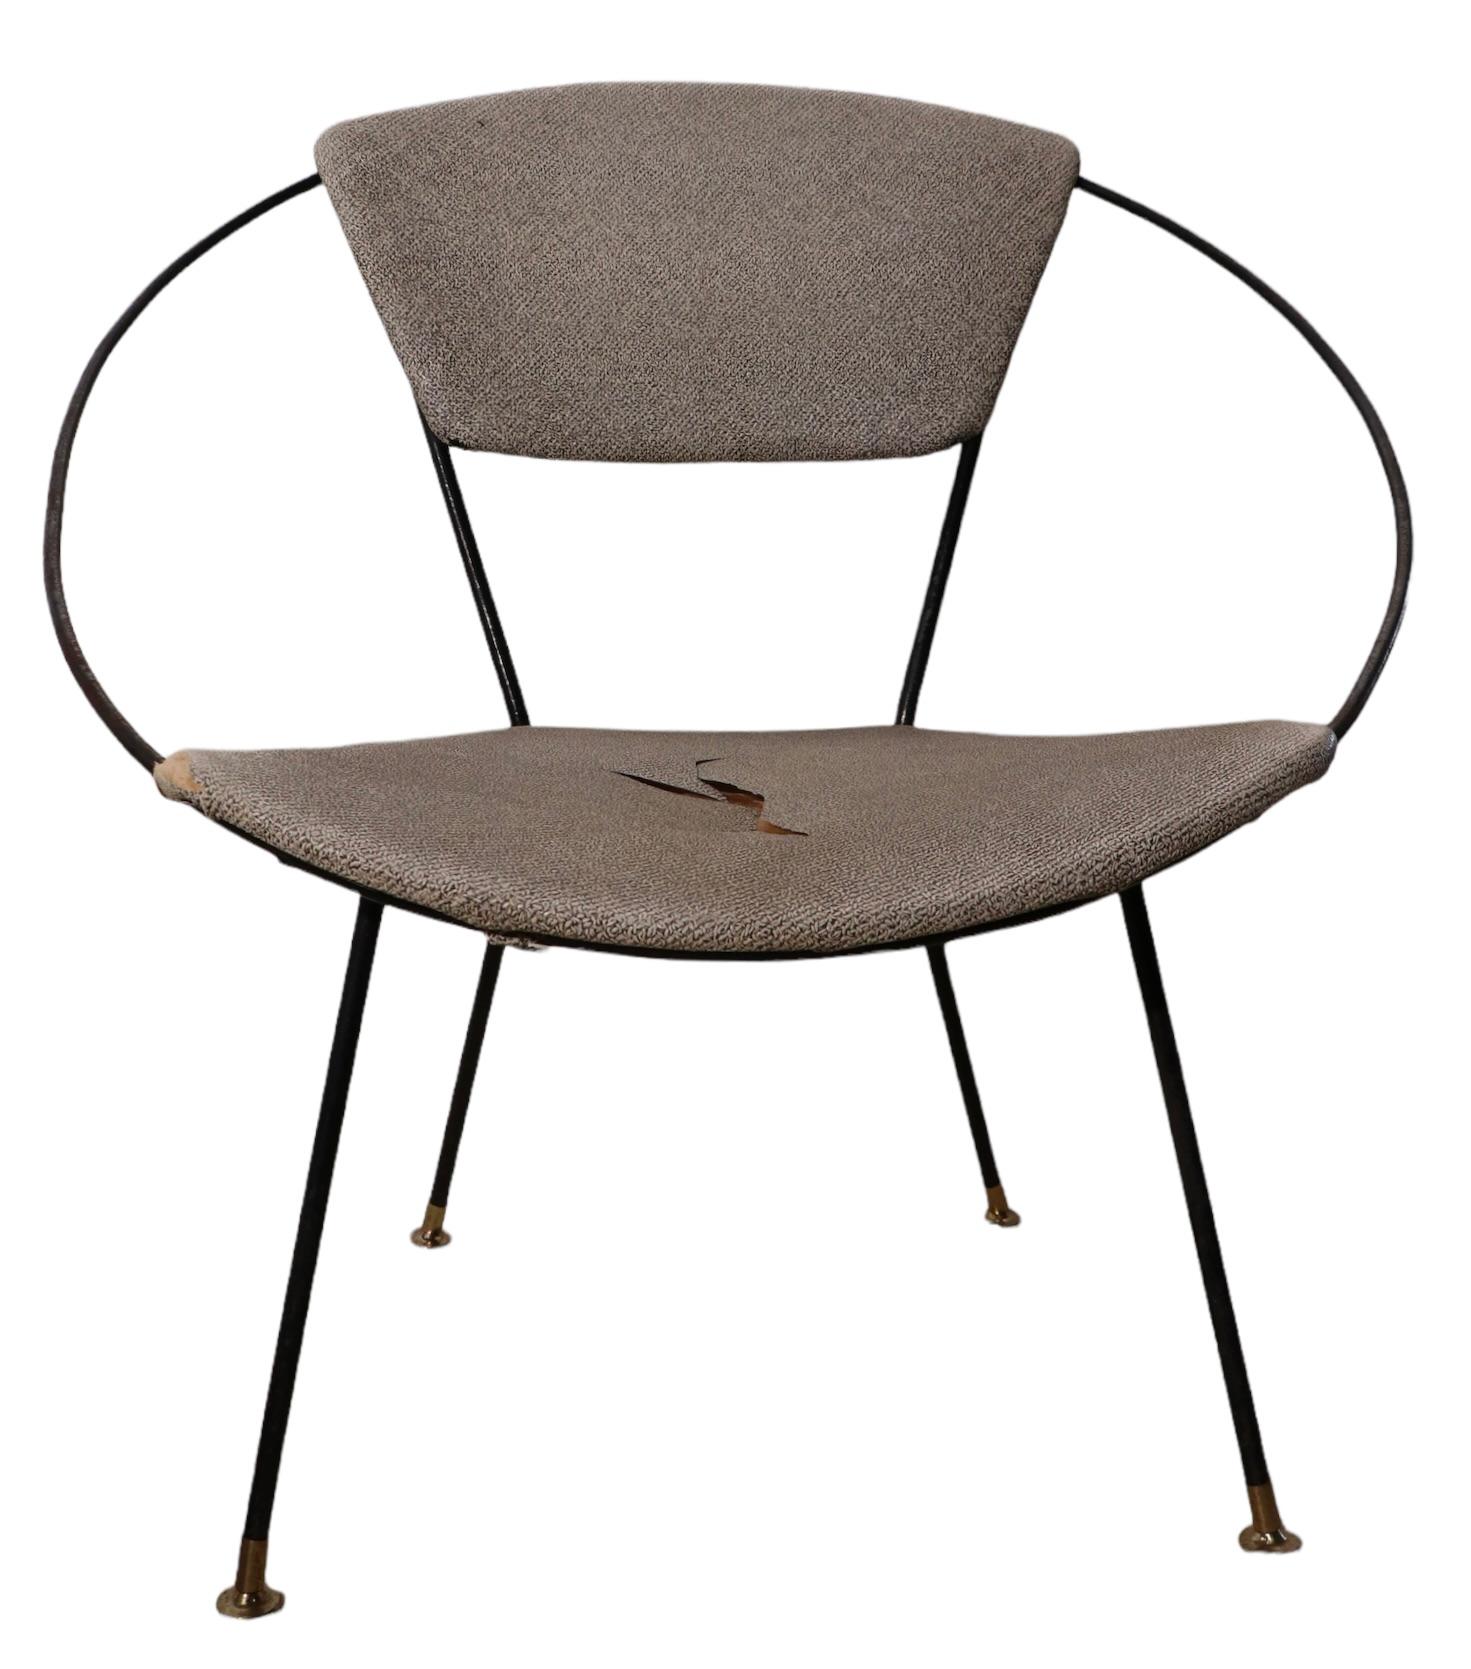 Pr. Wrought Iron Mid Century Hoop Chairs by John Cicchelli for Riley Wolff 1950s In Good Condition For Sale In New York, NY